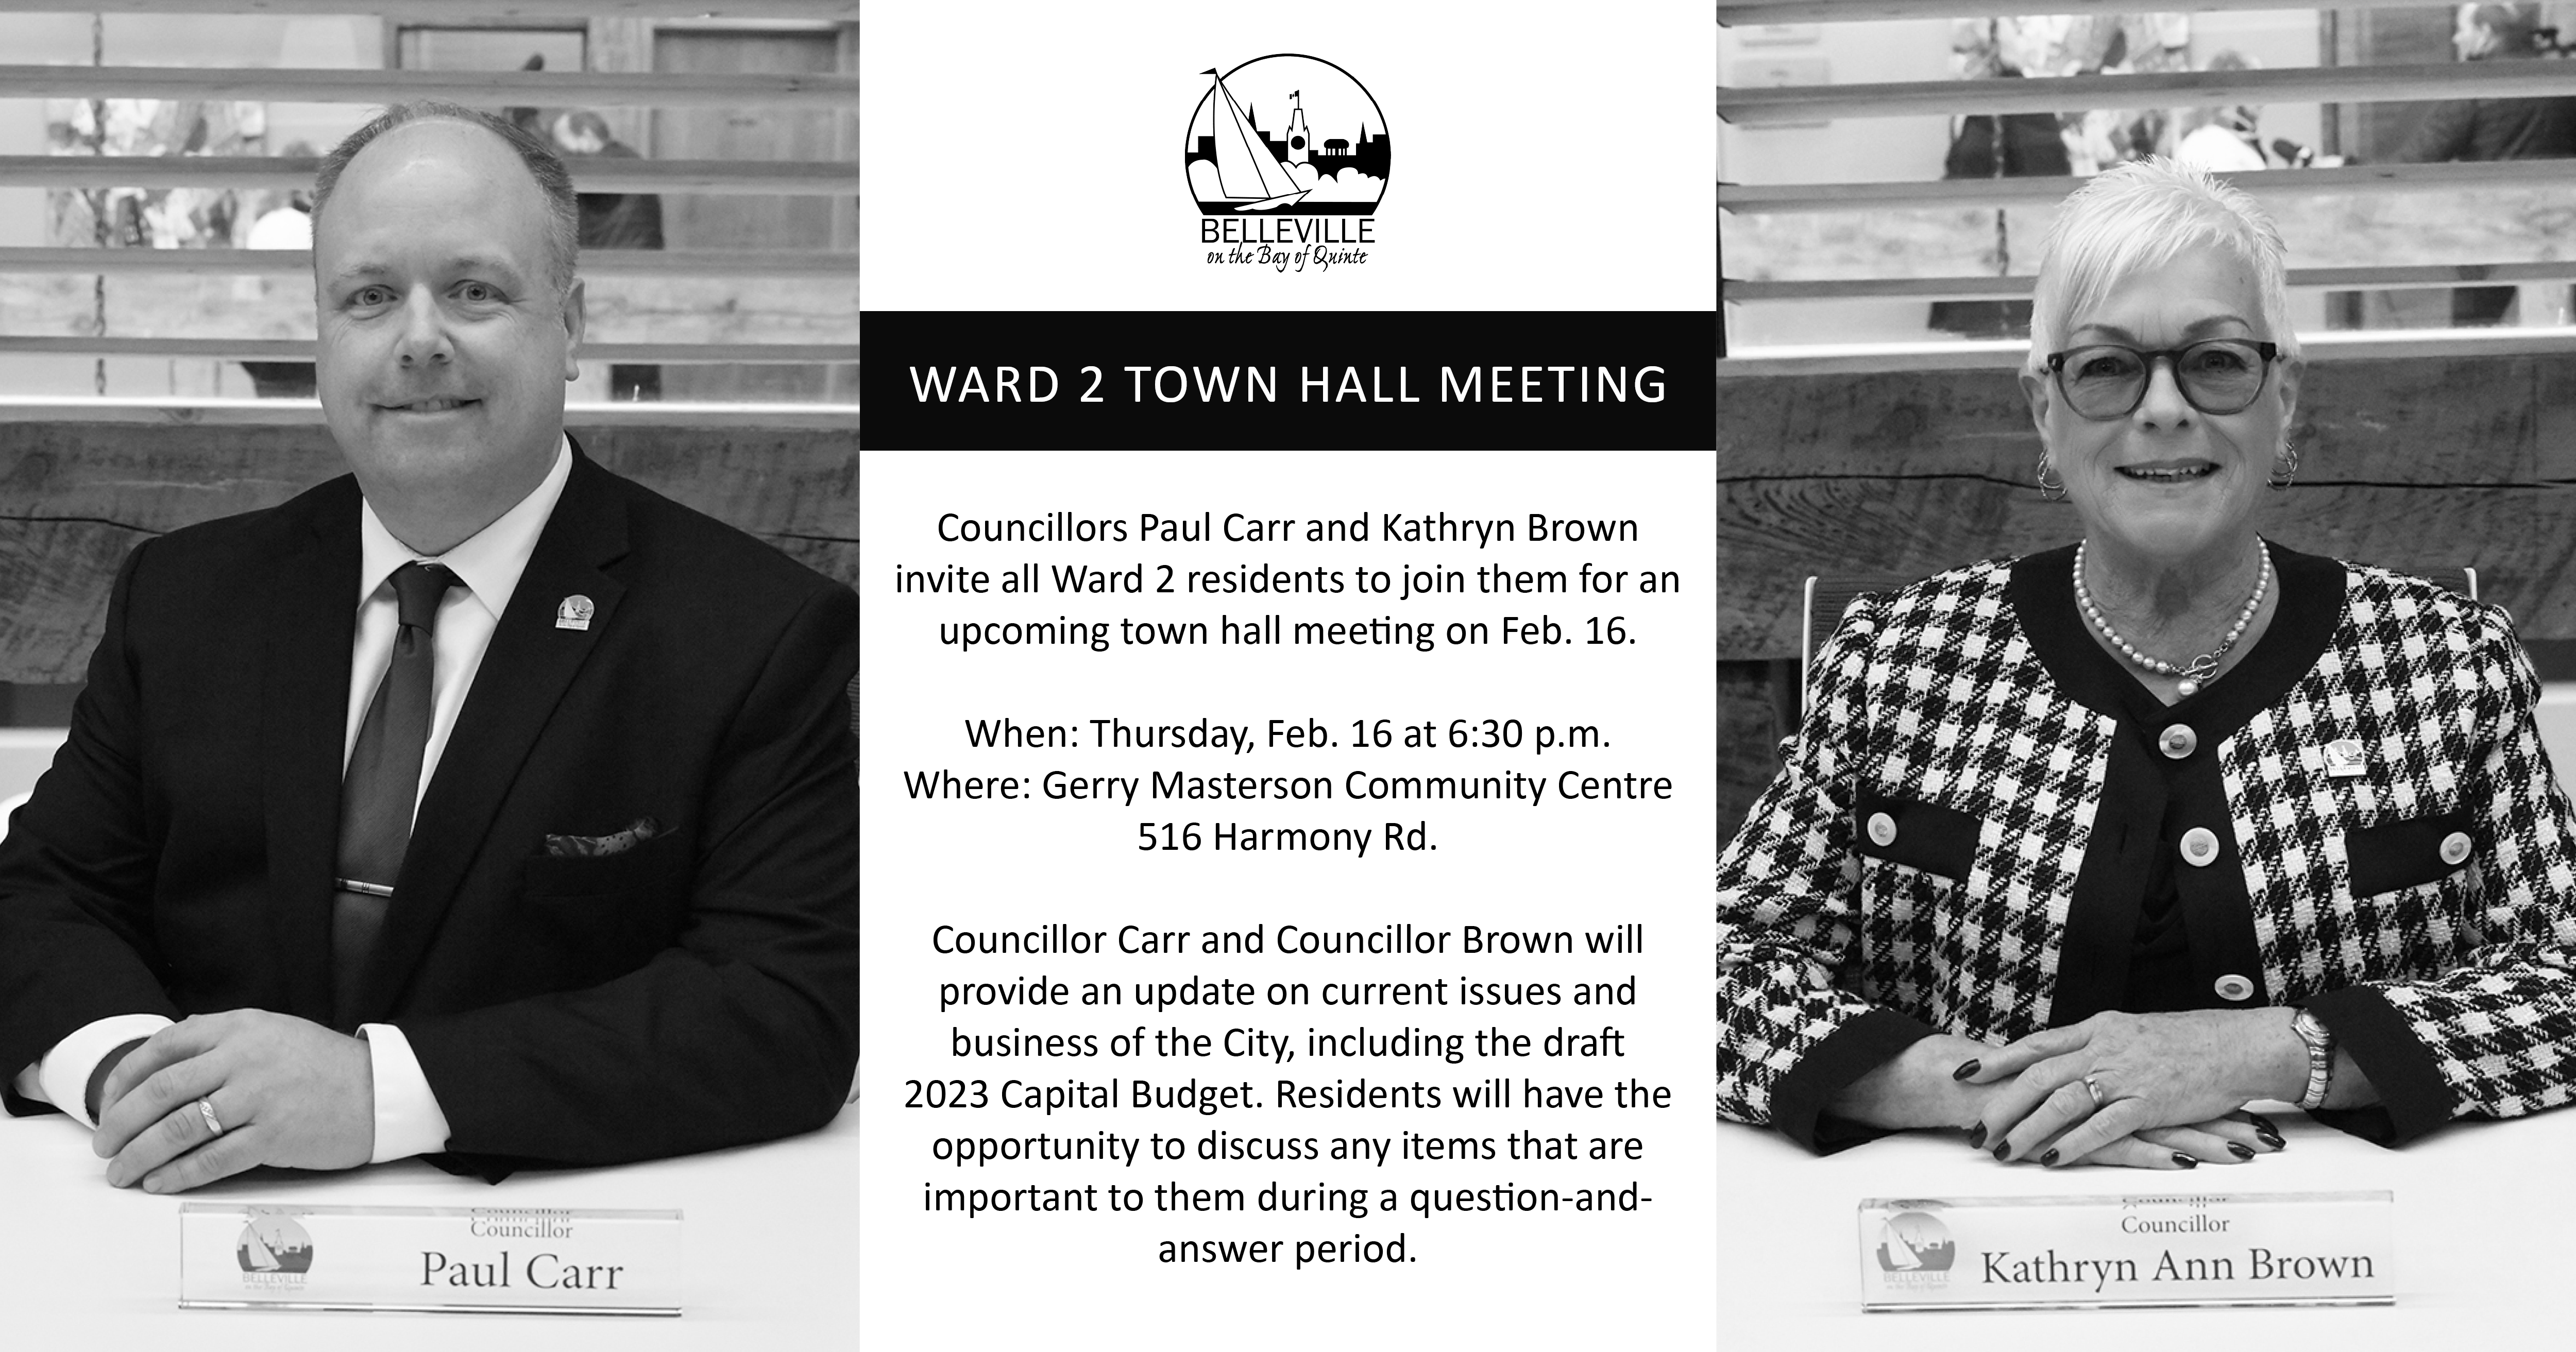 Graphic with photos of Councillor Paul Carr and Kathryn Brown with details about the upcoming Ward 2 Town Hall Meeting